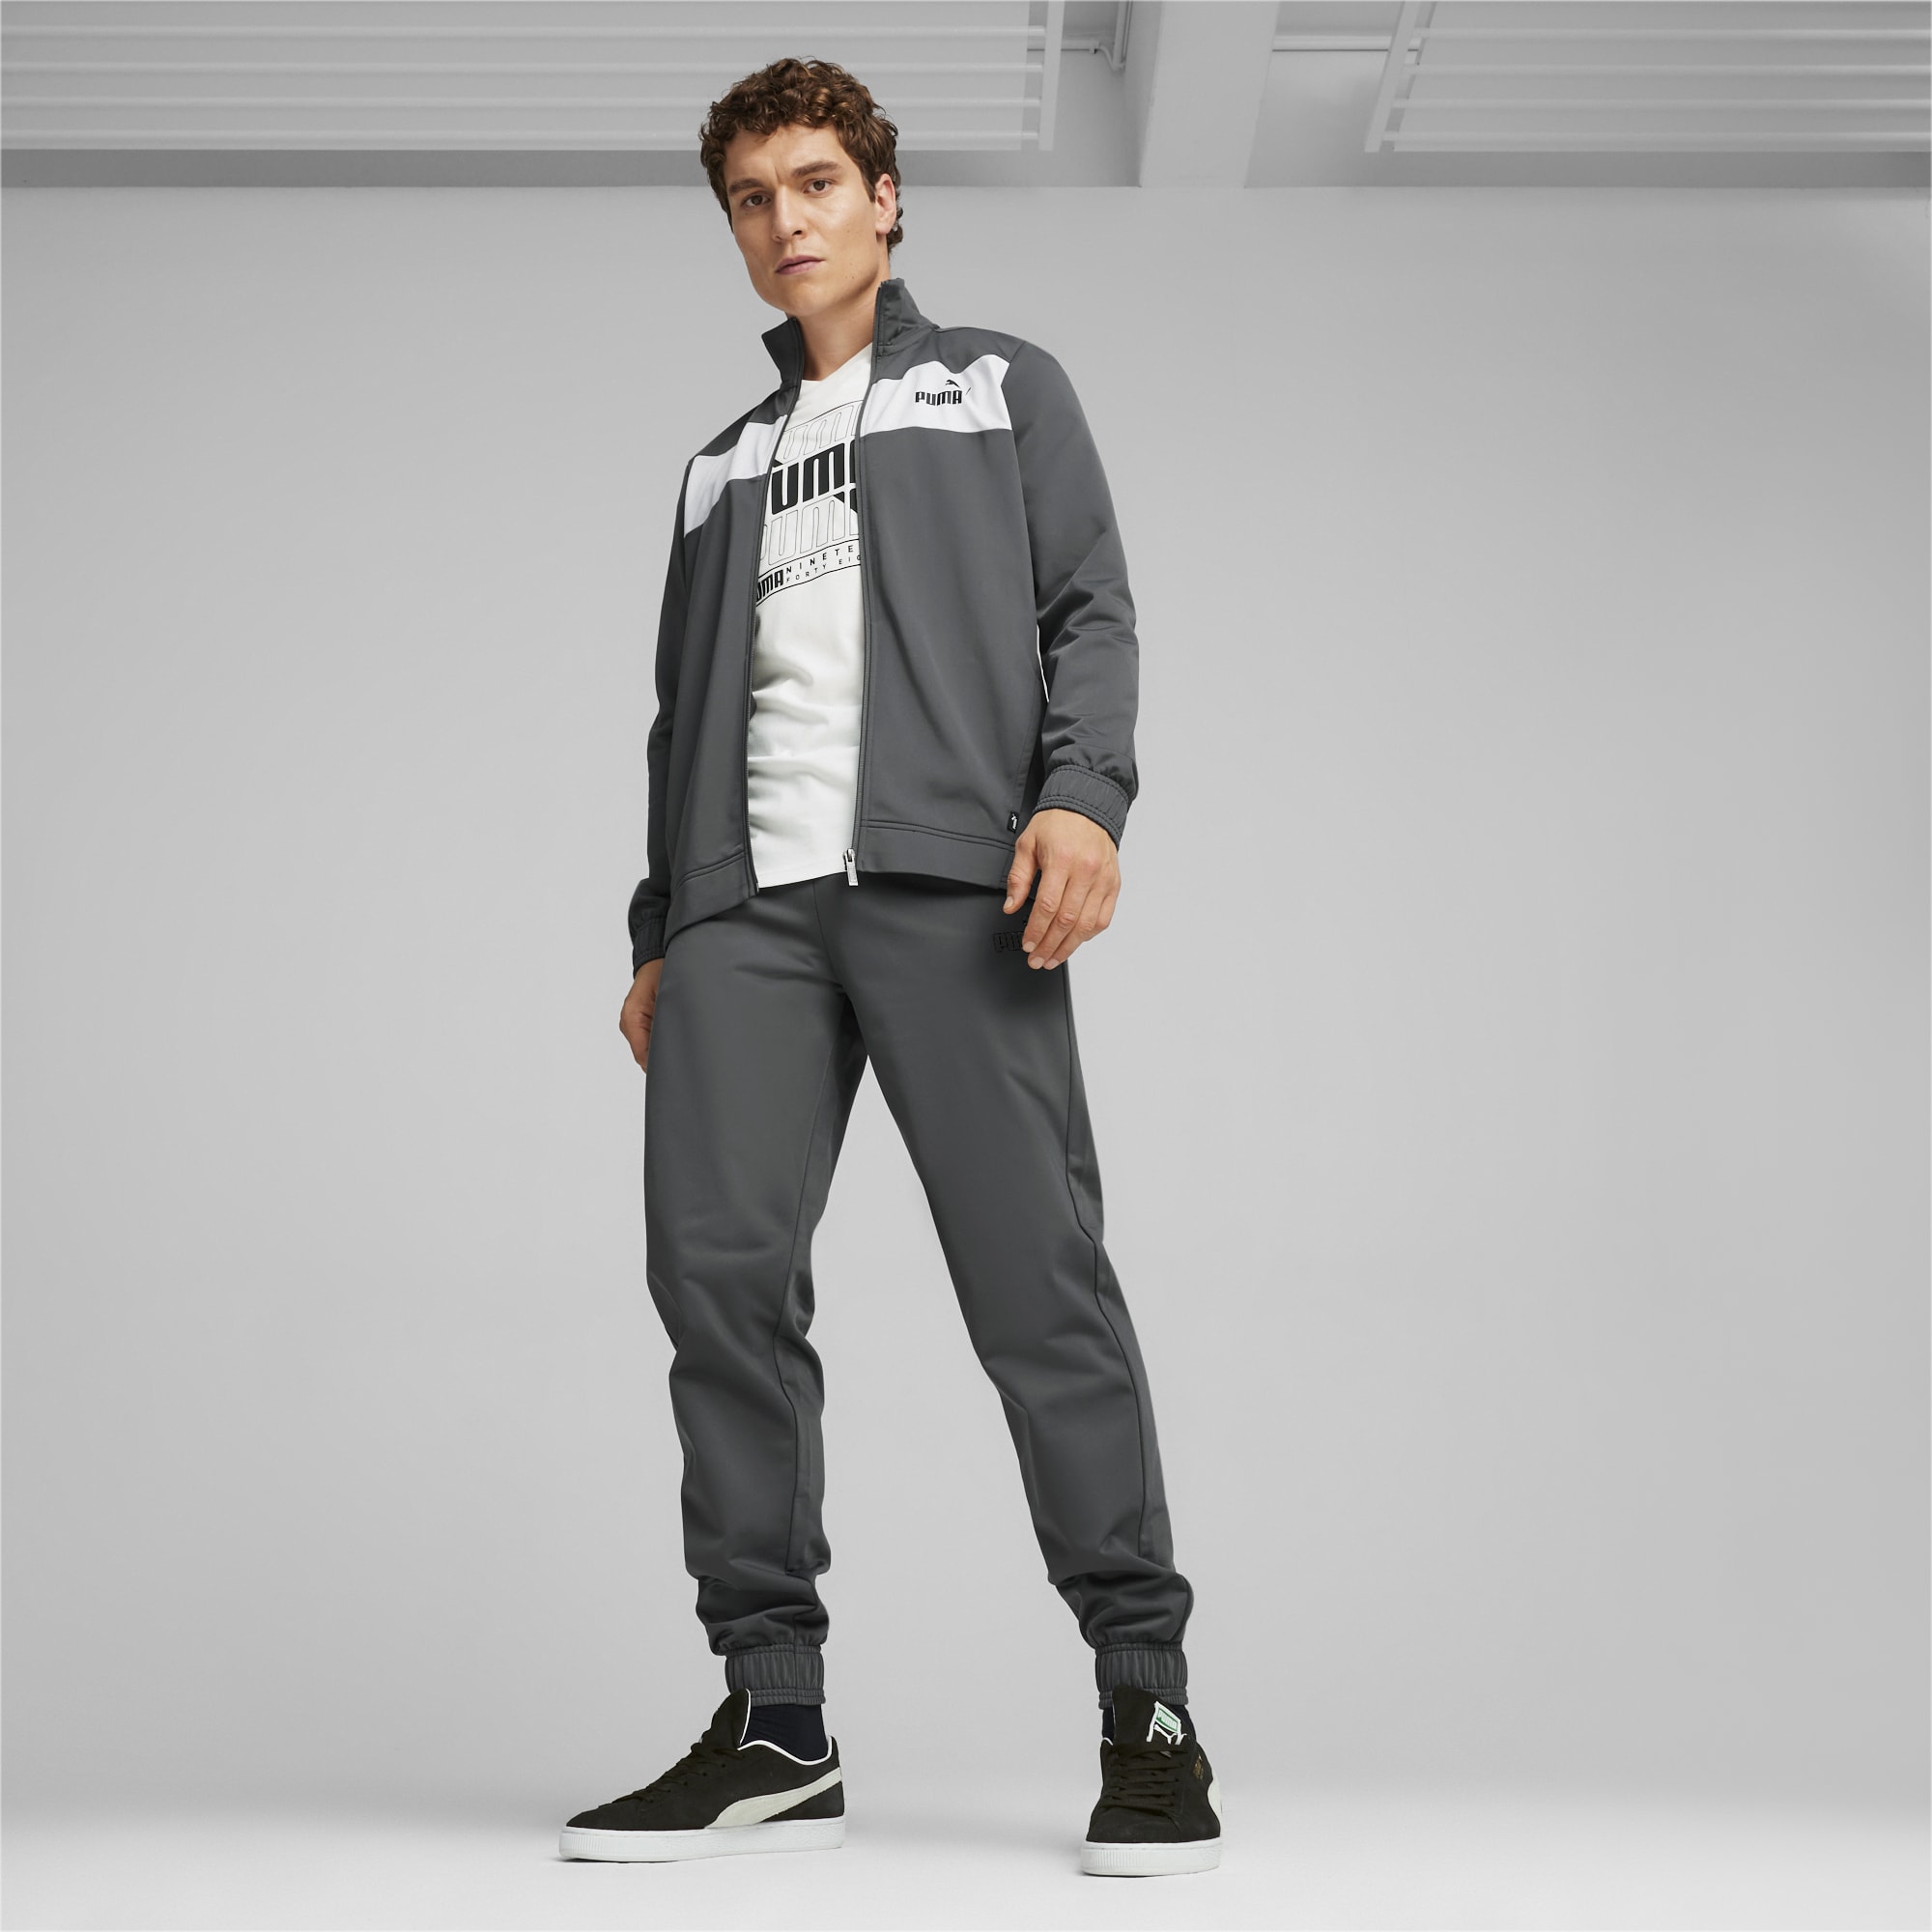 PUMA Men's Poly Tracksuit, Mineral Grey, Size XL, Clothing